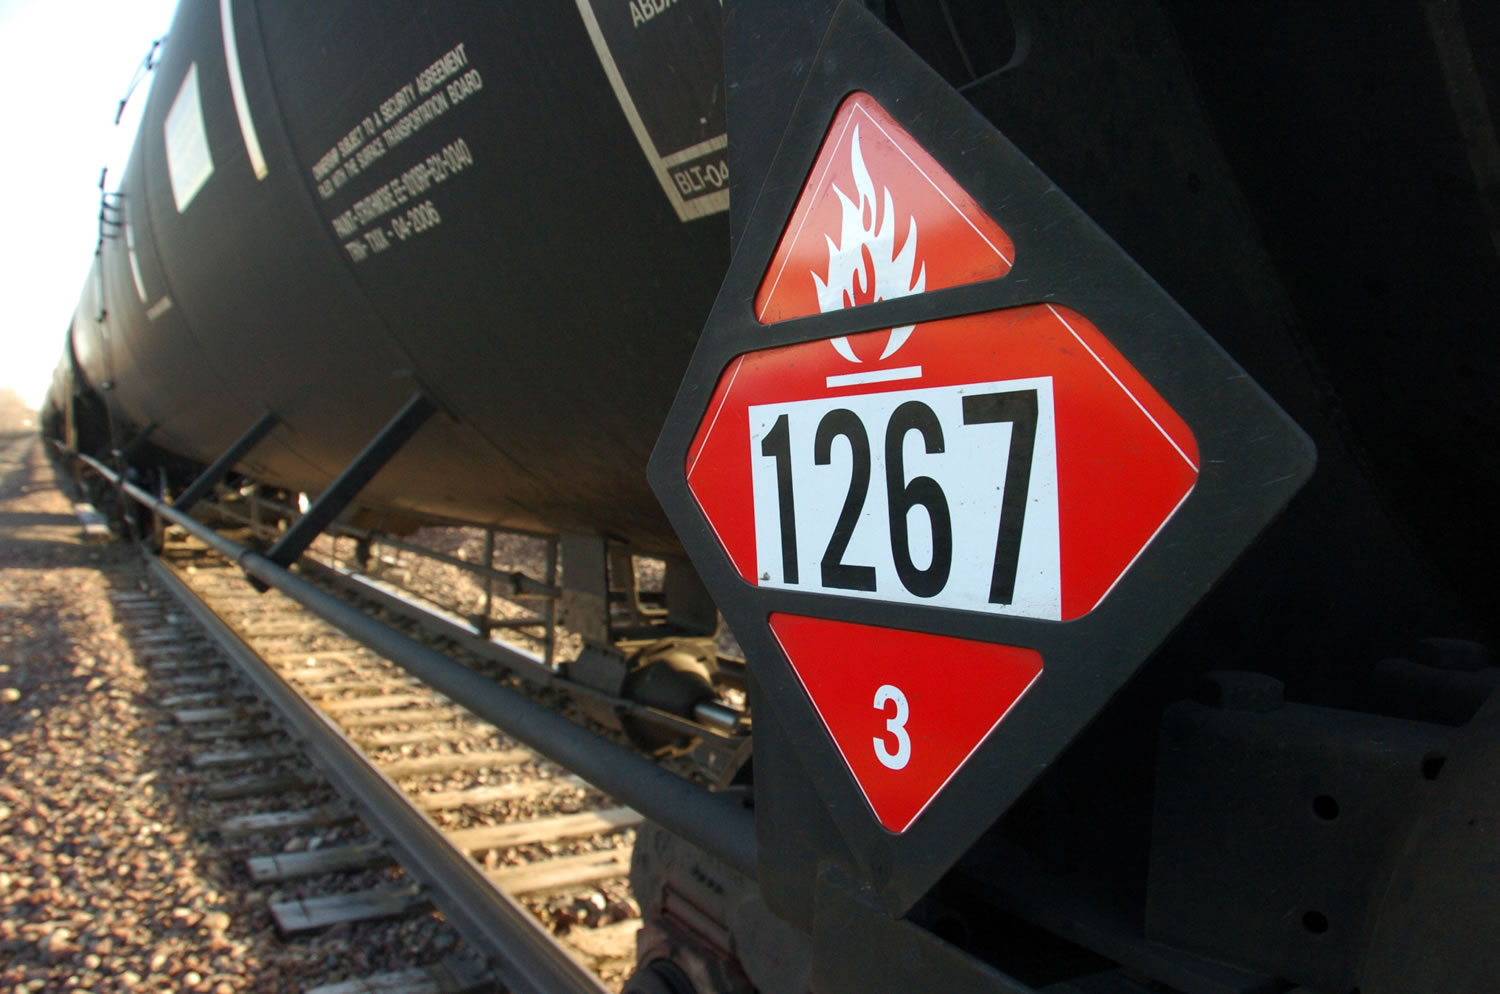 A warning placard appears on a tank car carrying crude oil near a loading terminal in Trenton, N.D.